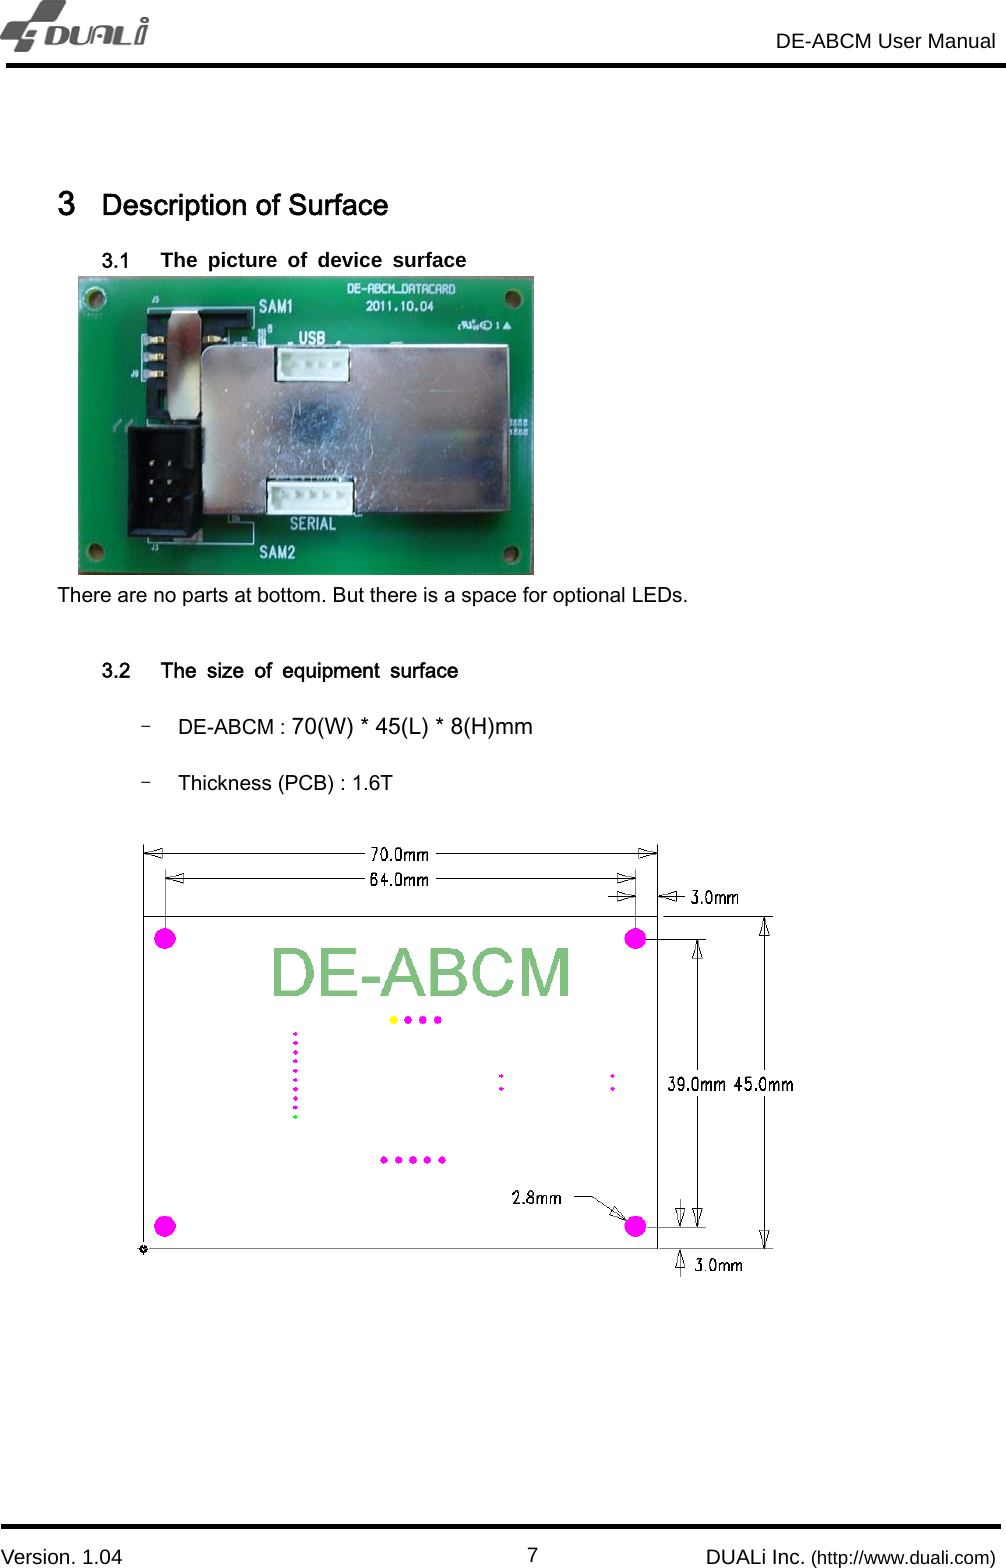                                                                       DE-ABCM User Manual                            Version. 1.04                                                        DUALi Inc. (http://www.duali.com)  7 3 Description of Surface 3.1  The picture of device surface       There are no parts at bottom. But there is a space for optional LEDs.    3.2 The  size  of  equipment  surface - DE-ABCM : 70(W) * 45(L) * 8(H)mm - Thickness (PCB) : 1.6T 